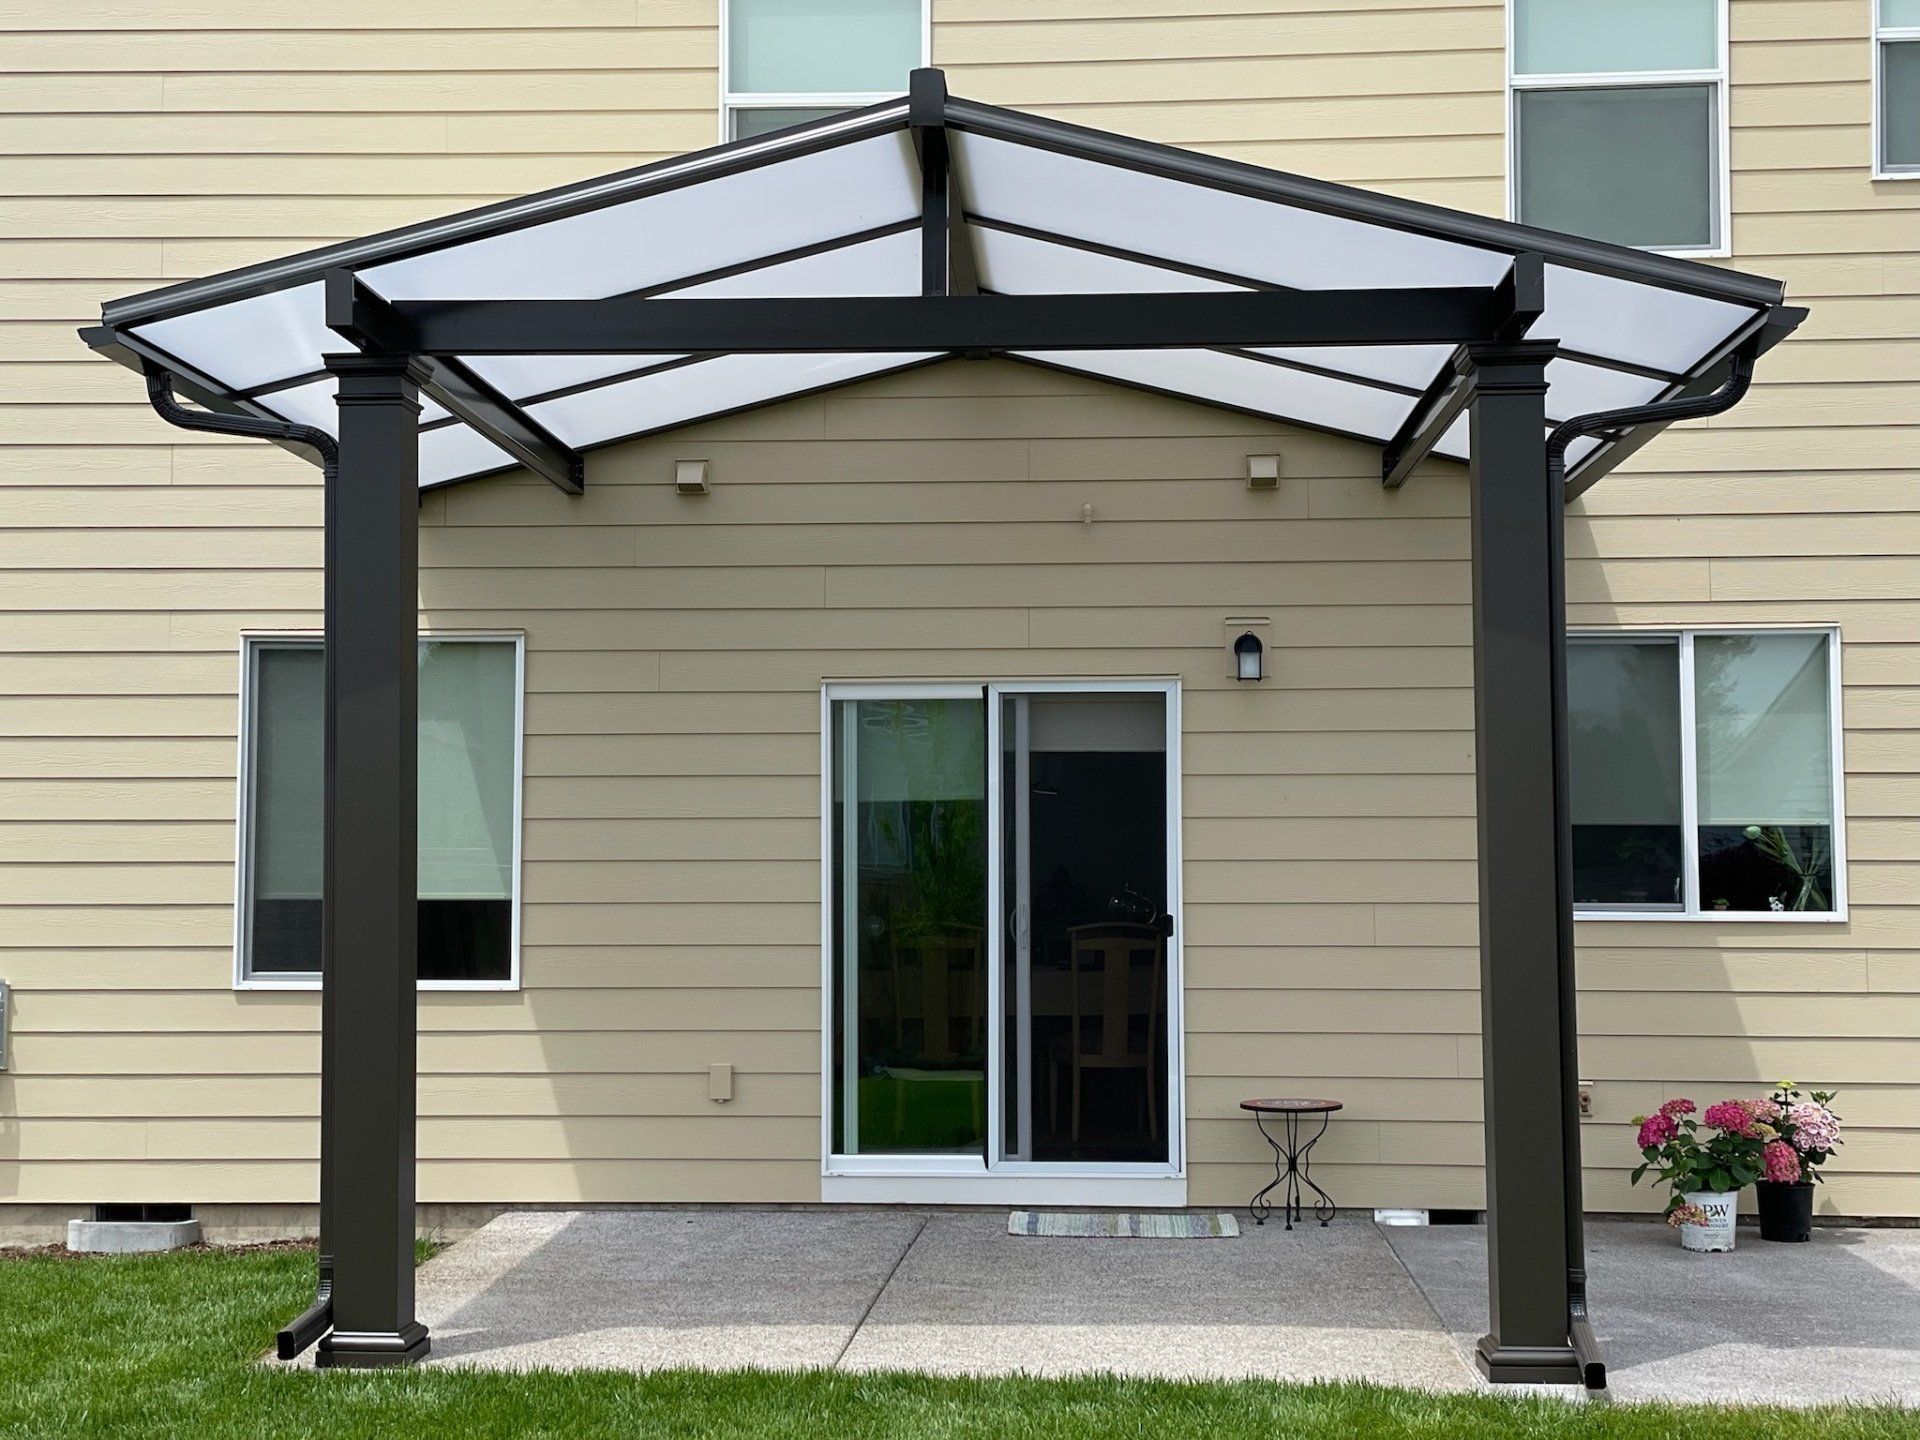 Patio Cover Contractor in Sherwood - Crown Patio Covers Process